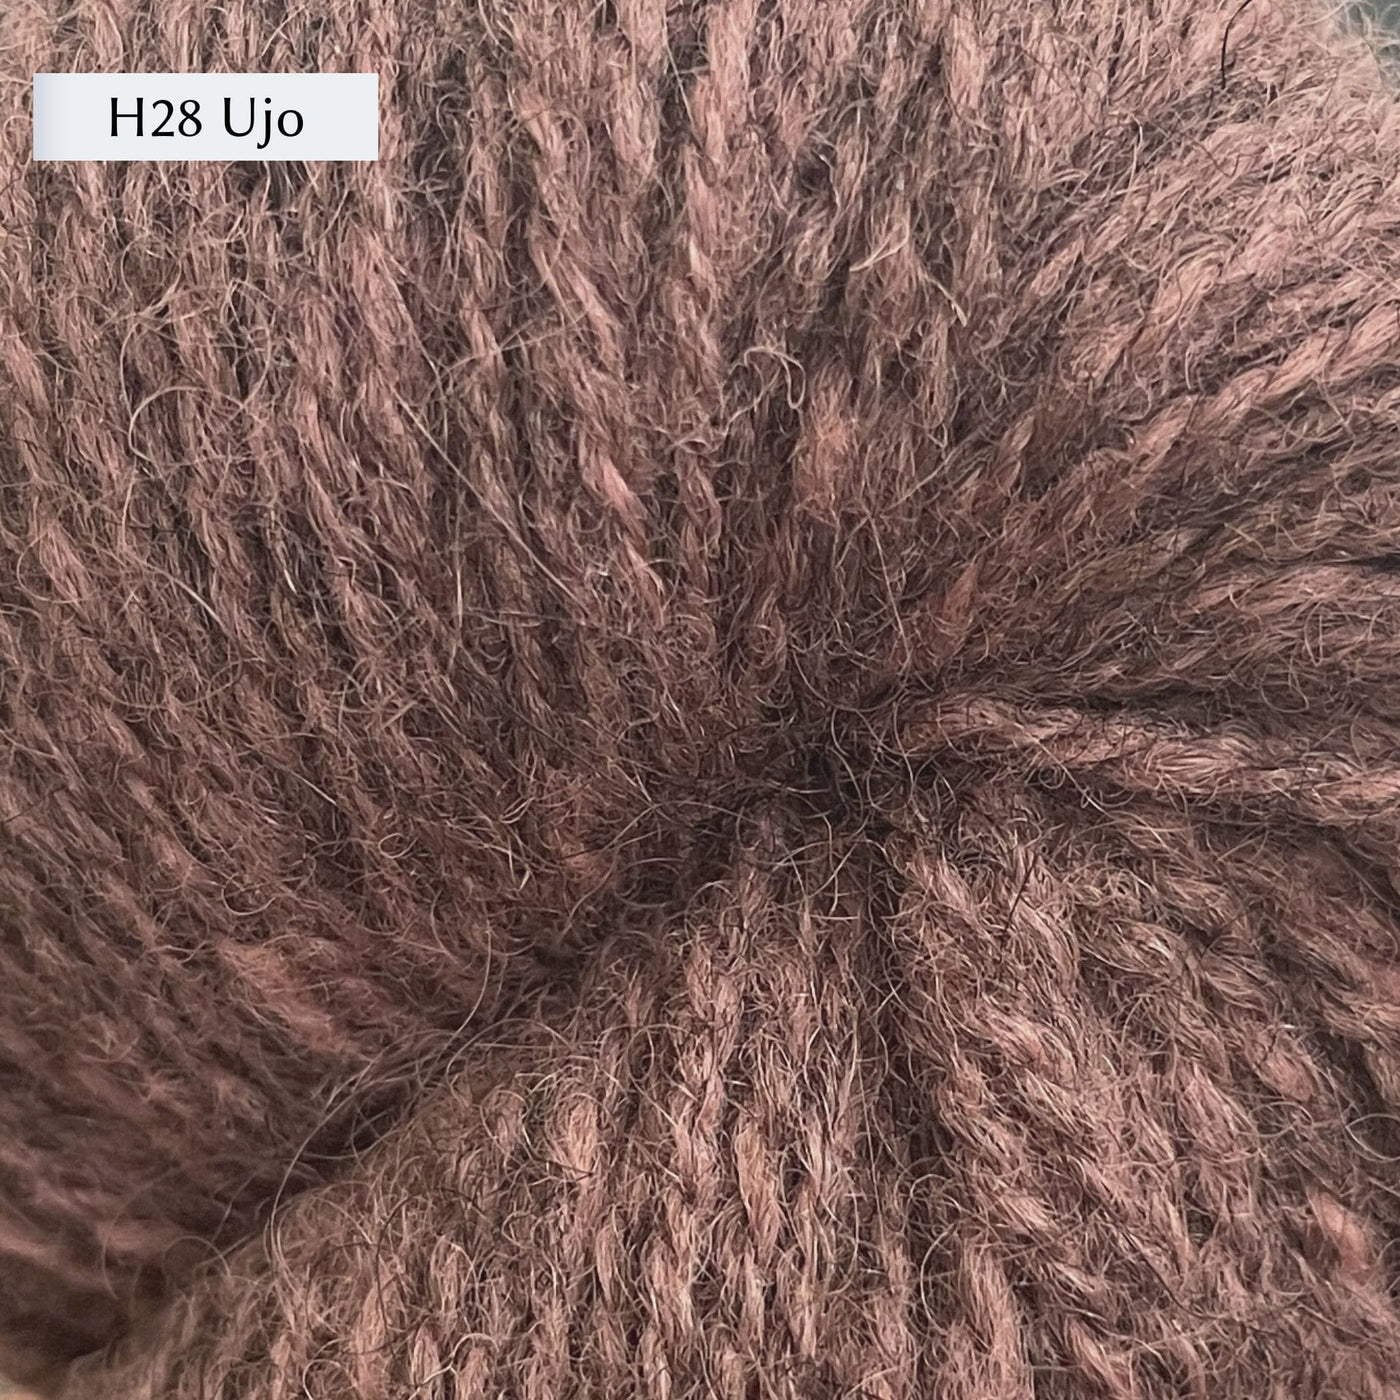 Tukuwool DK Yarn, 100% Finnish Wool shown in colorway H28 Ujo which is a heathered mauve color. 